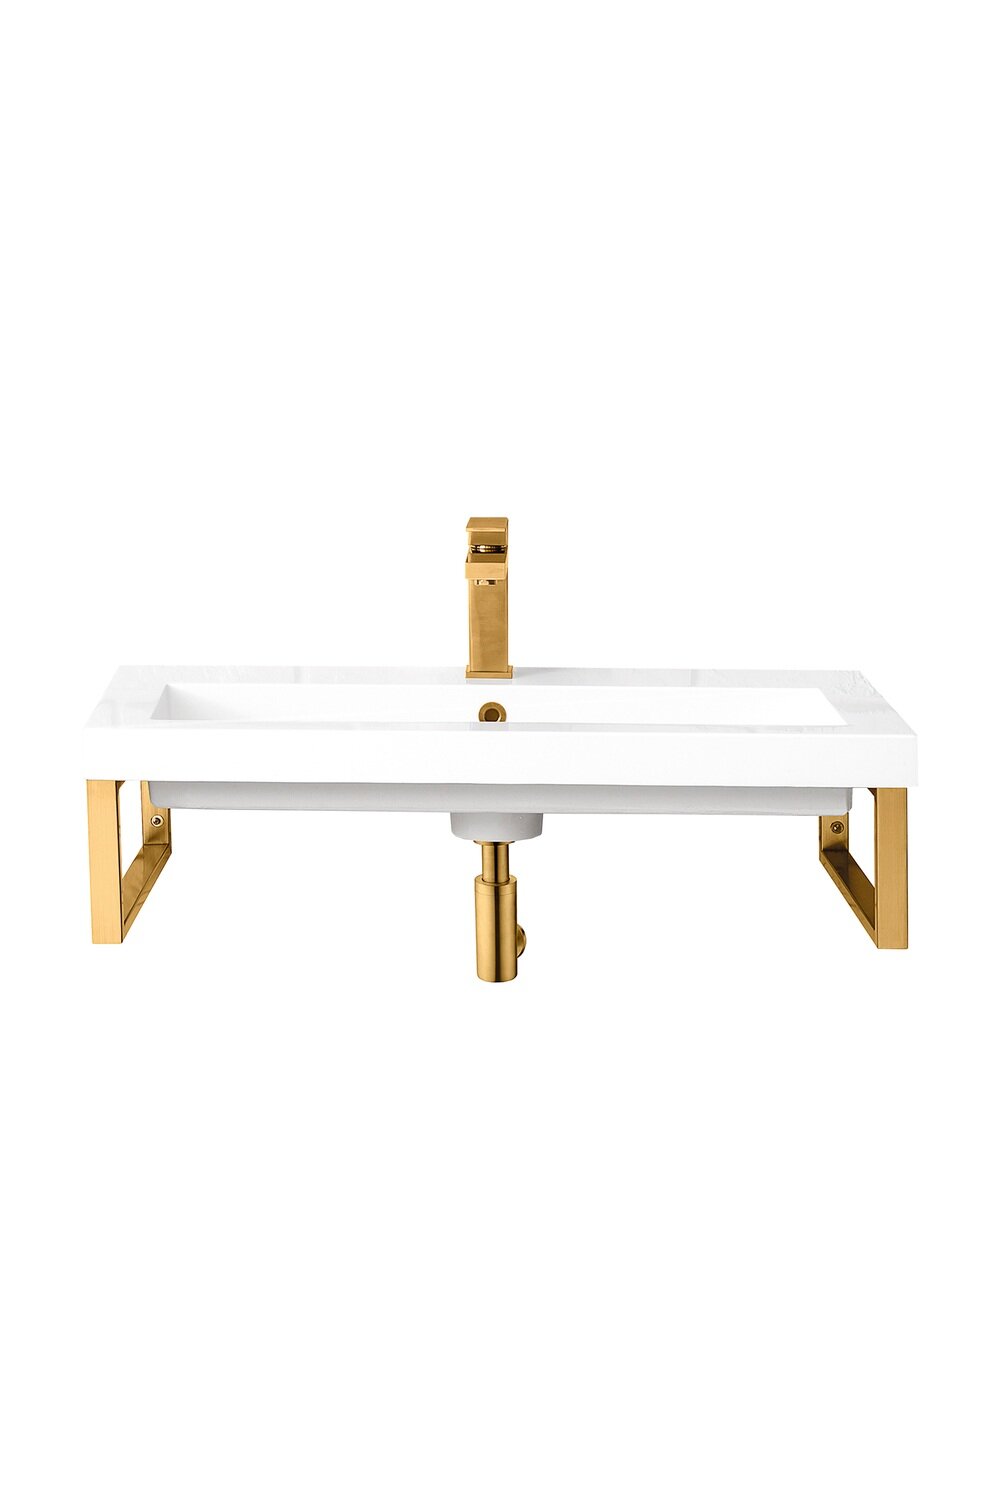 JAMES MARTIN - Two Boston 15.25&quot; Wall Brackets, Radiant Gold w/ 31.5&quot; White Glossy Composite Stone Top 055BK16RGD31.5WG2